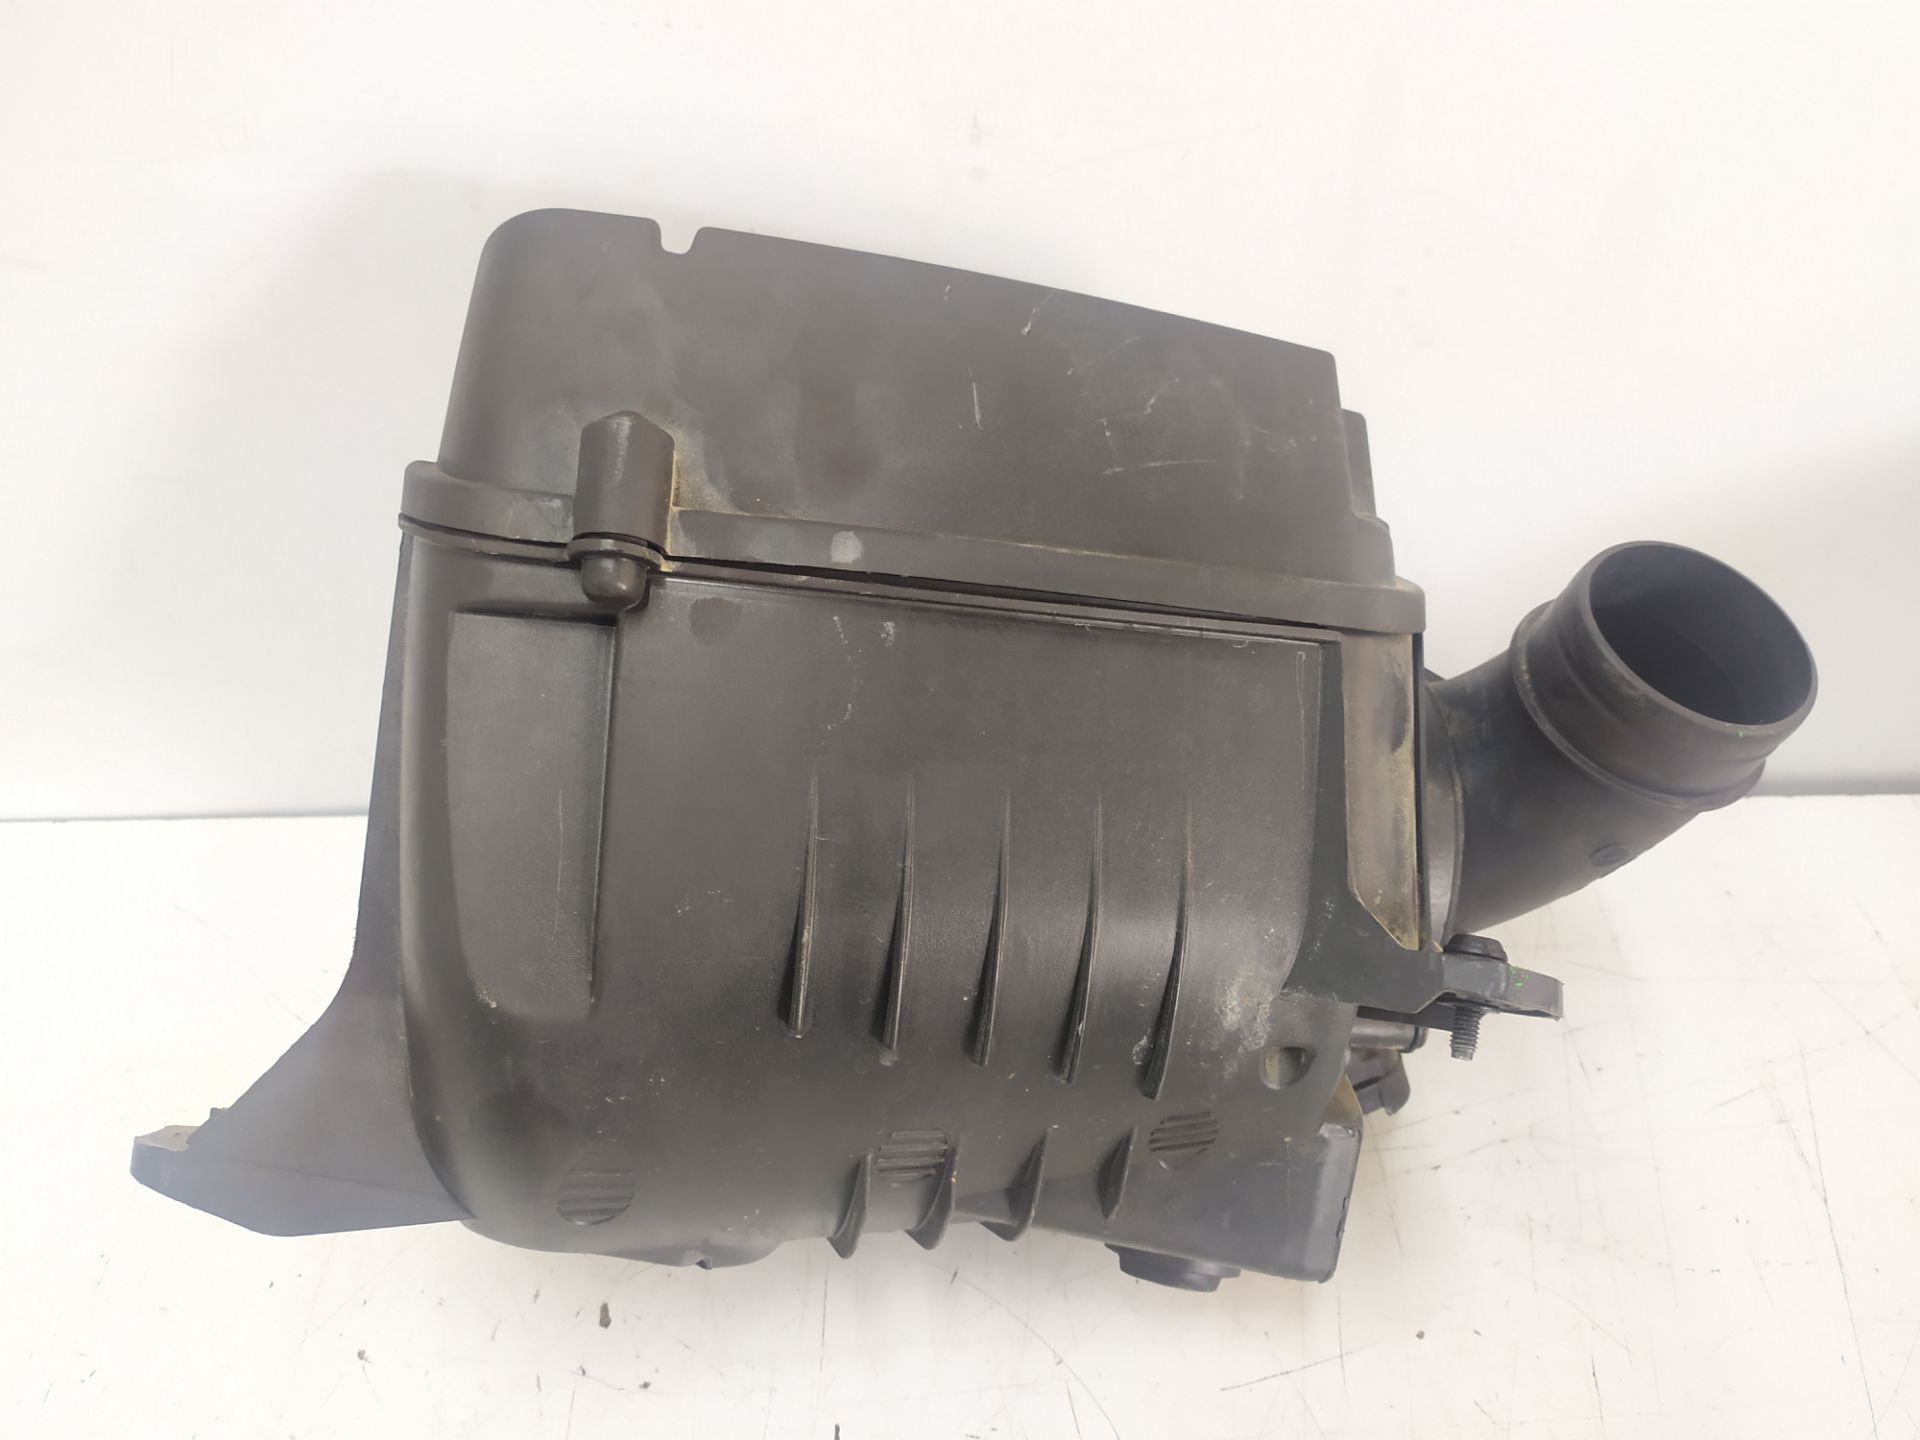 SEAT Altea 1 generation (2004-2013) Other Engine Compartment Parts 1F0129407 25114728